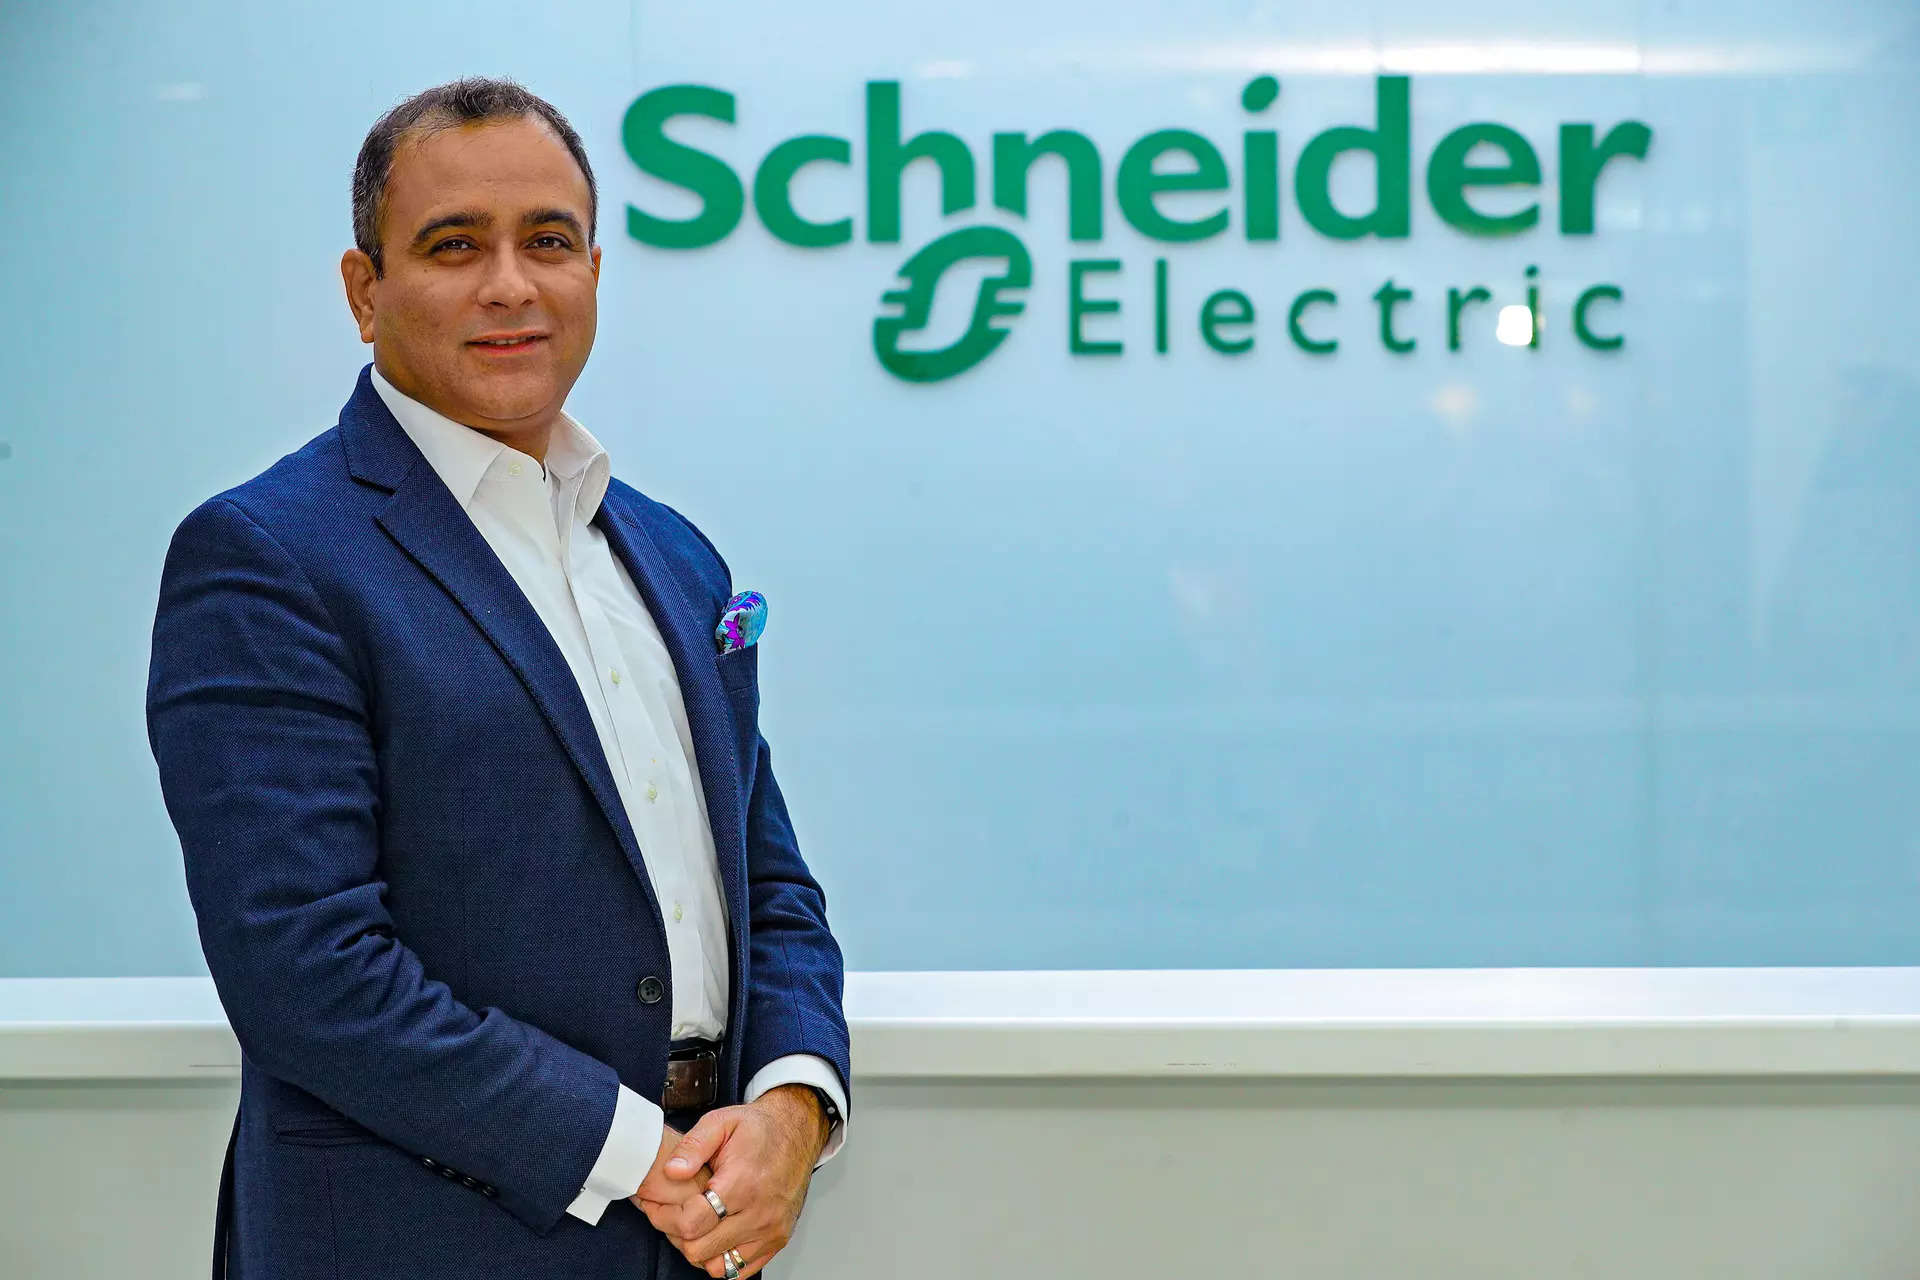 Schneider Electric to invest ₹3,200 crore in India to grow